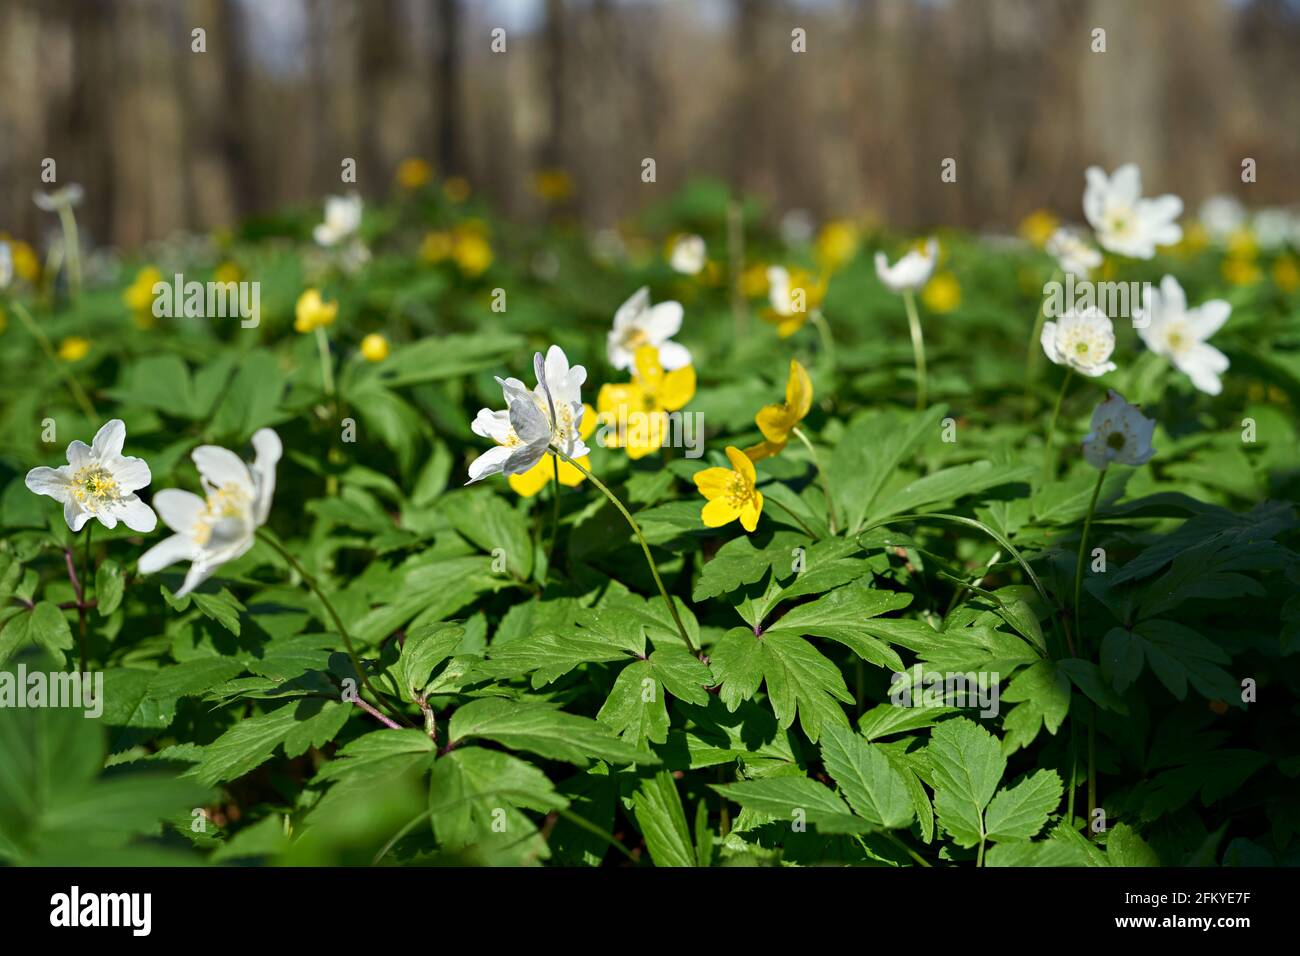 Yellow and white wood anemones in the forest. Selective focus on flowers heads. Blurred background. Stock Photo